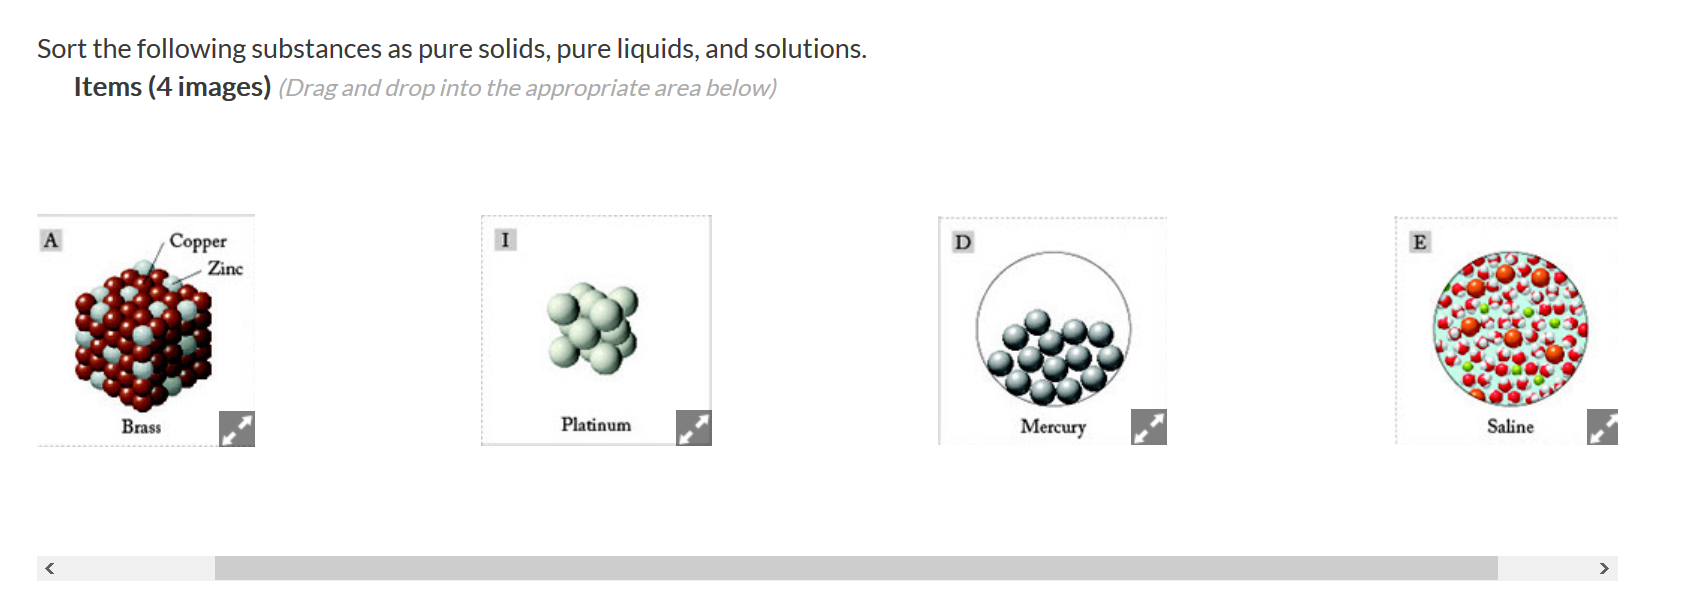 Sort the following substances as pure solids, pure liquids, and solutions.
Items (4 images) (Drag and drop into the appropriate area below)
Copper
Zinc
Platinum
Brass
Mercury
Saline
